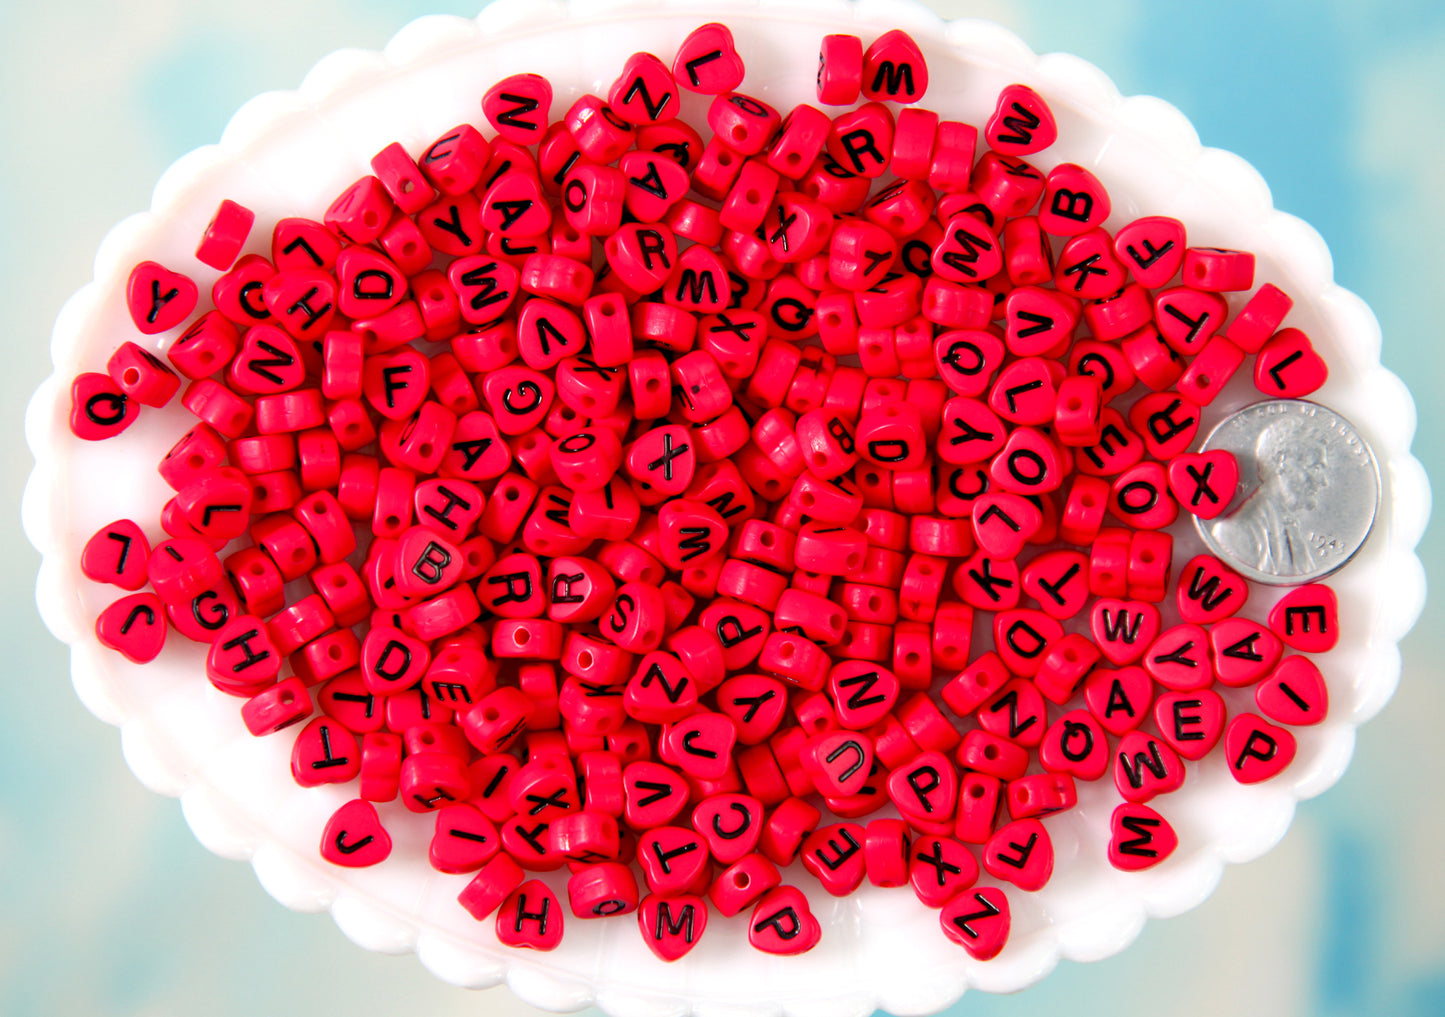 Letter Beads - 7mm Little Red Heart Shaped Alphabet Acrylic or Resin Beads - 300 pc set